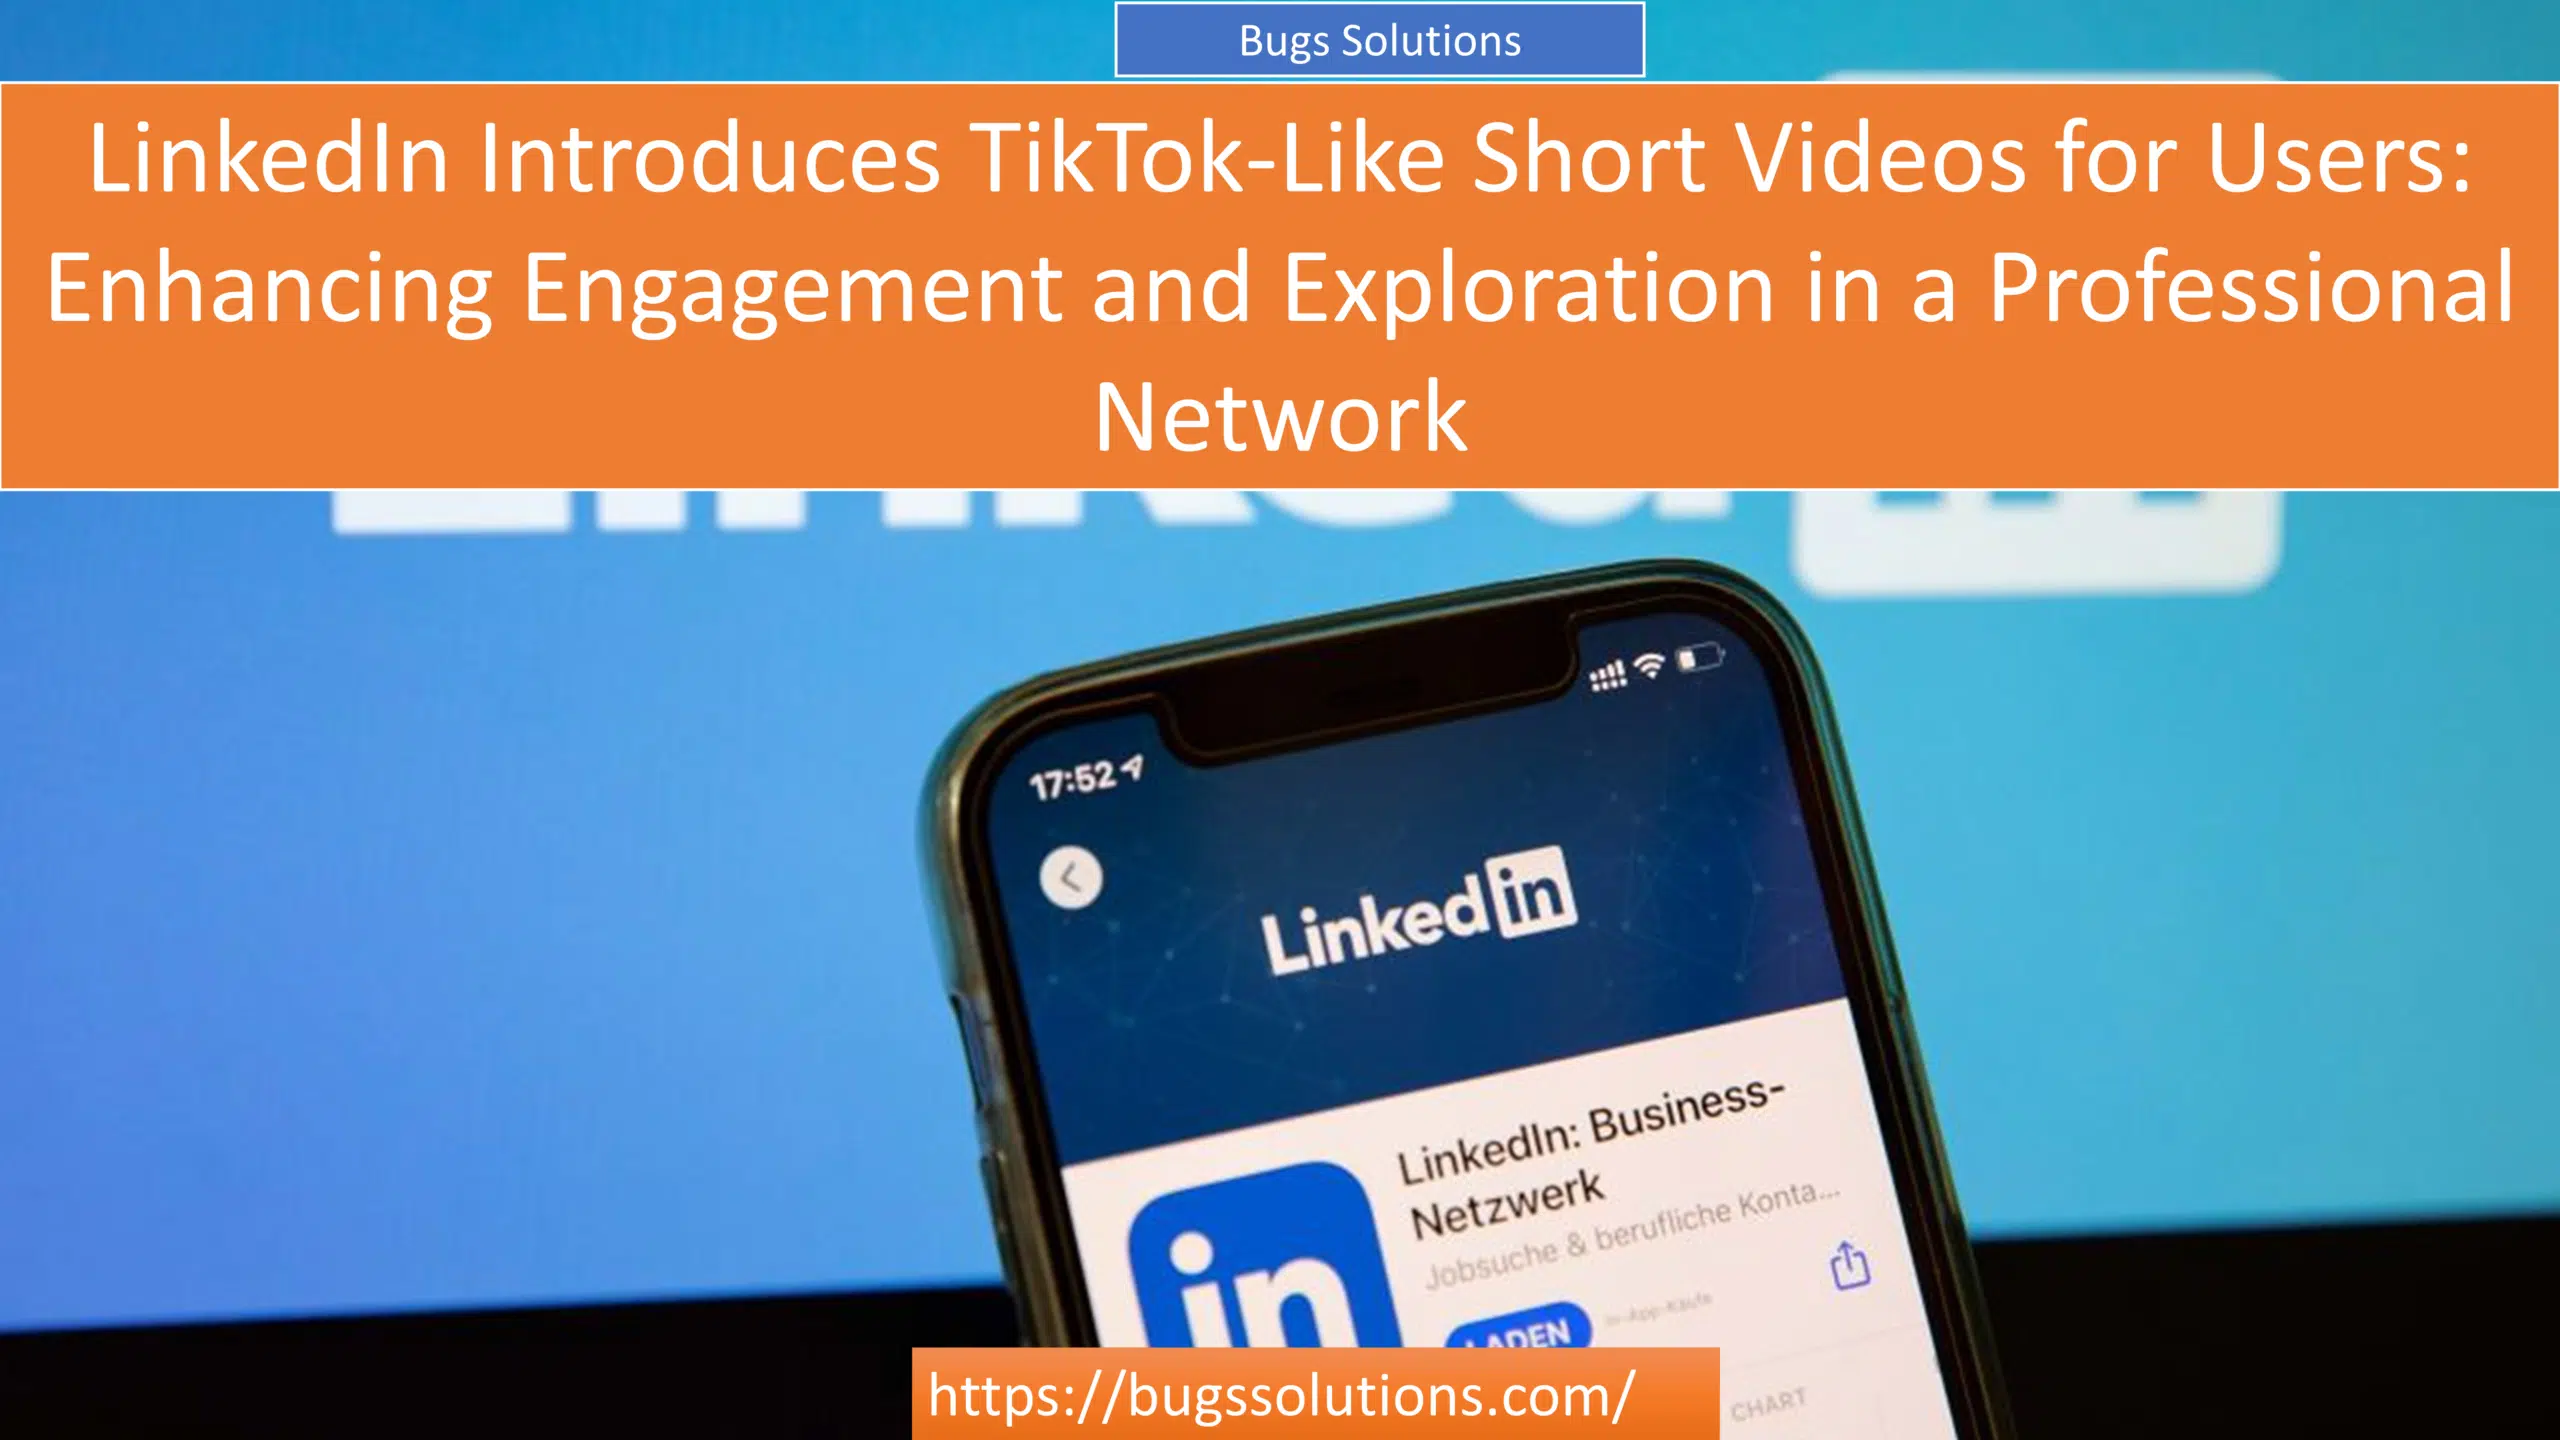 LinkedIn Introduces TikTok-Like Short Videos For Users: Enhancing Engagement And Exploration In A Professional Network